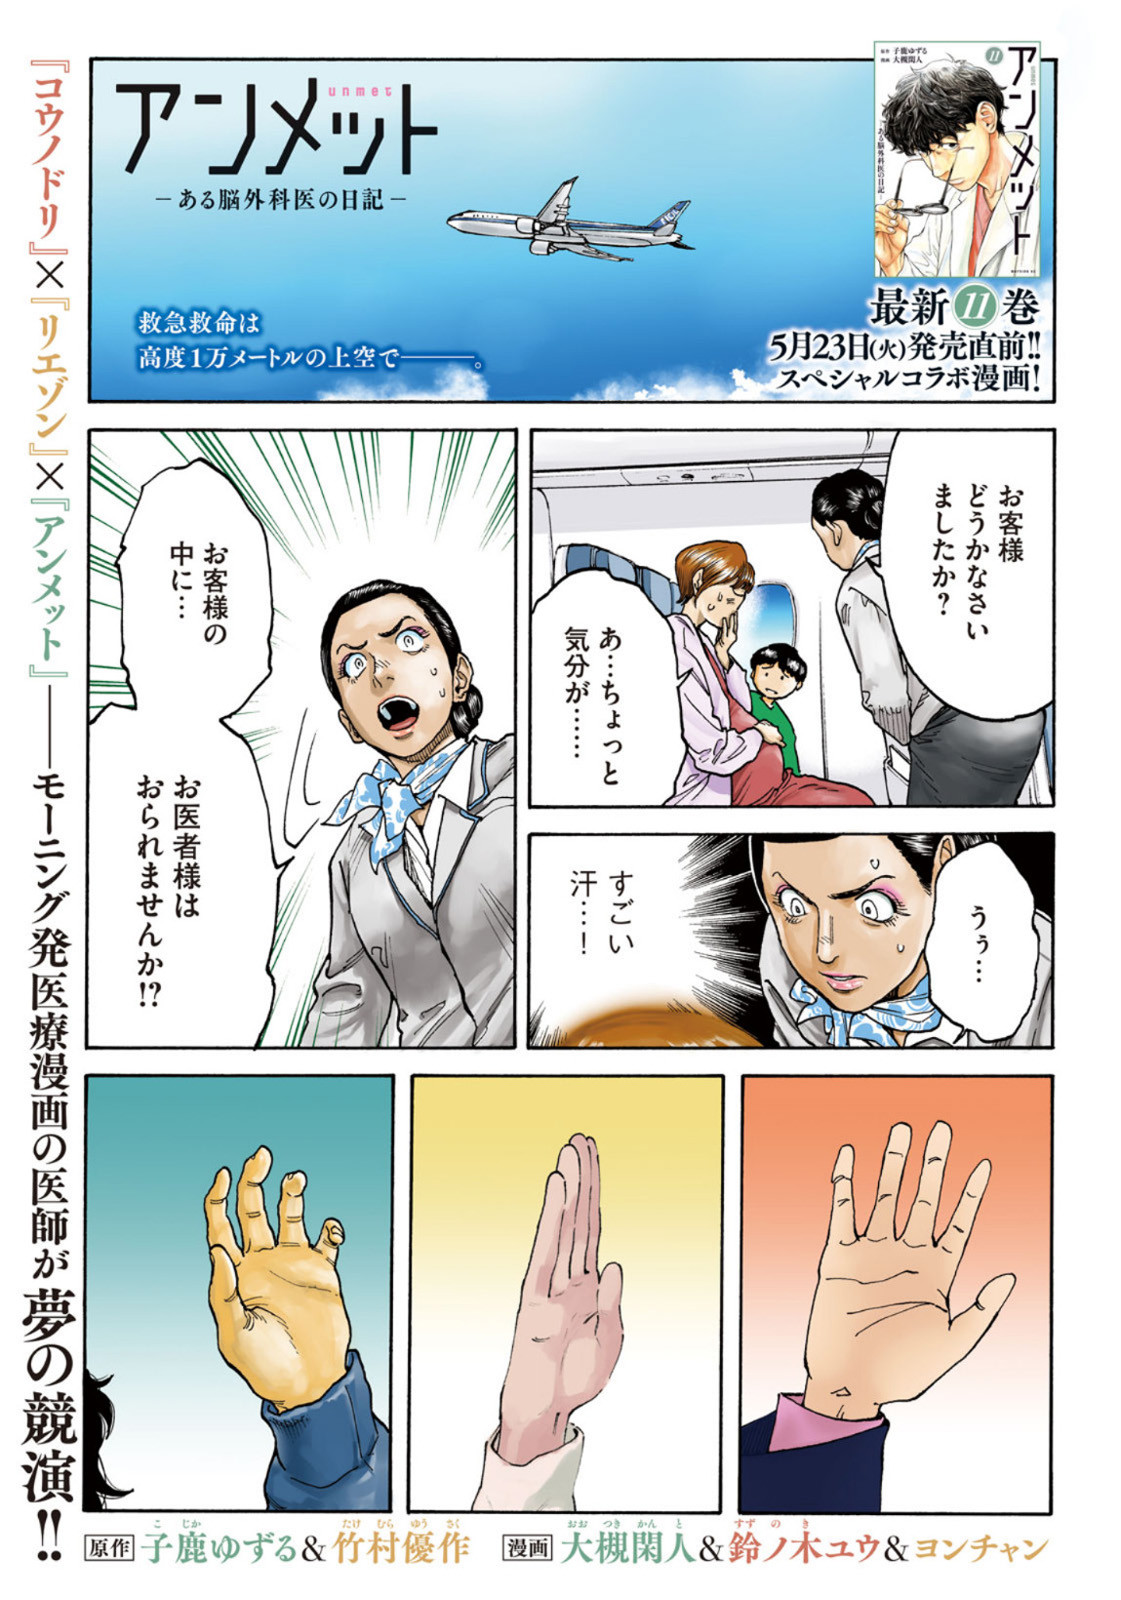 Weekly Morning - 週刊モーニング - Chapter 2023-25 - Page 3